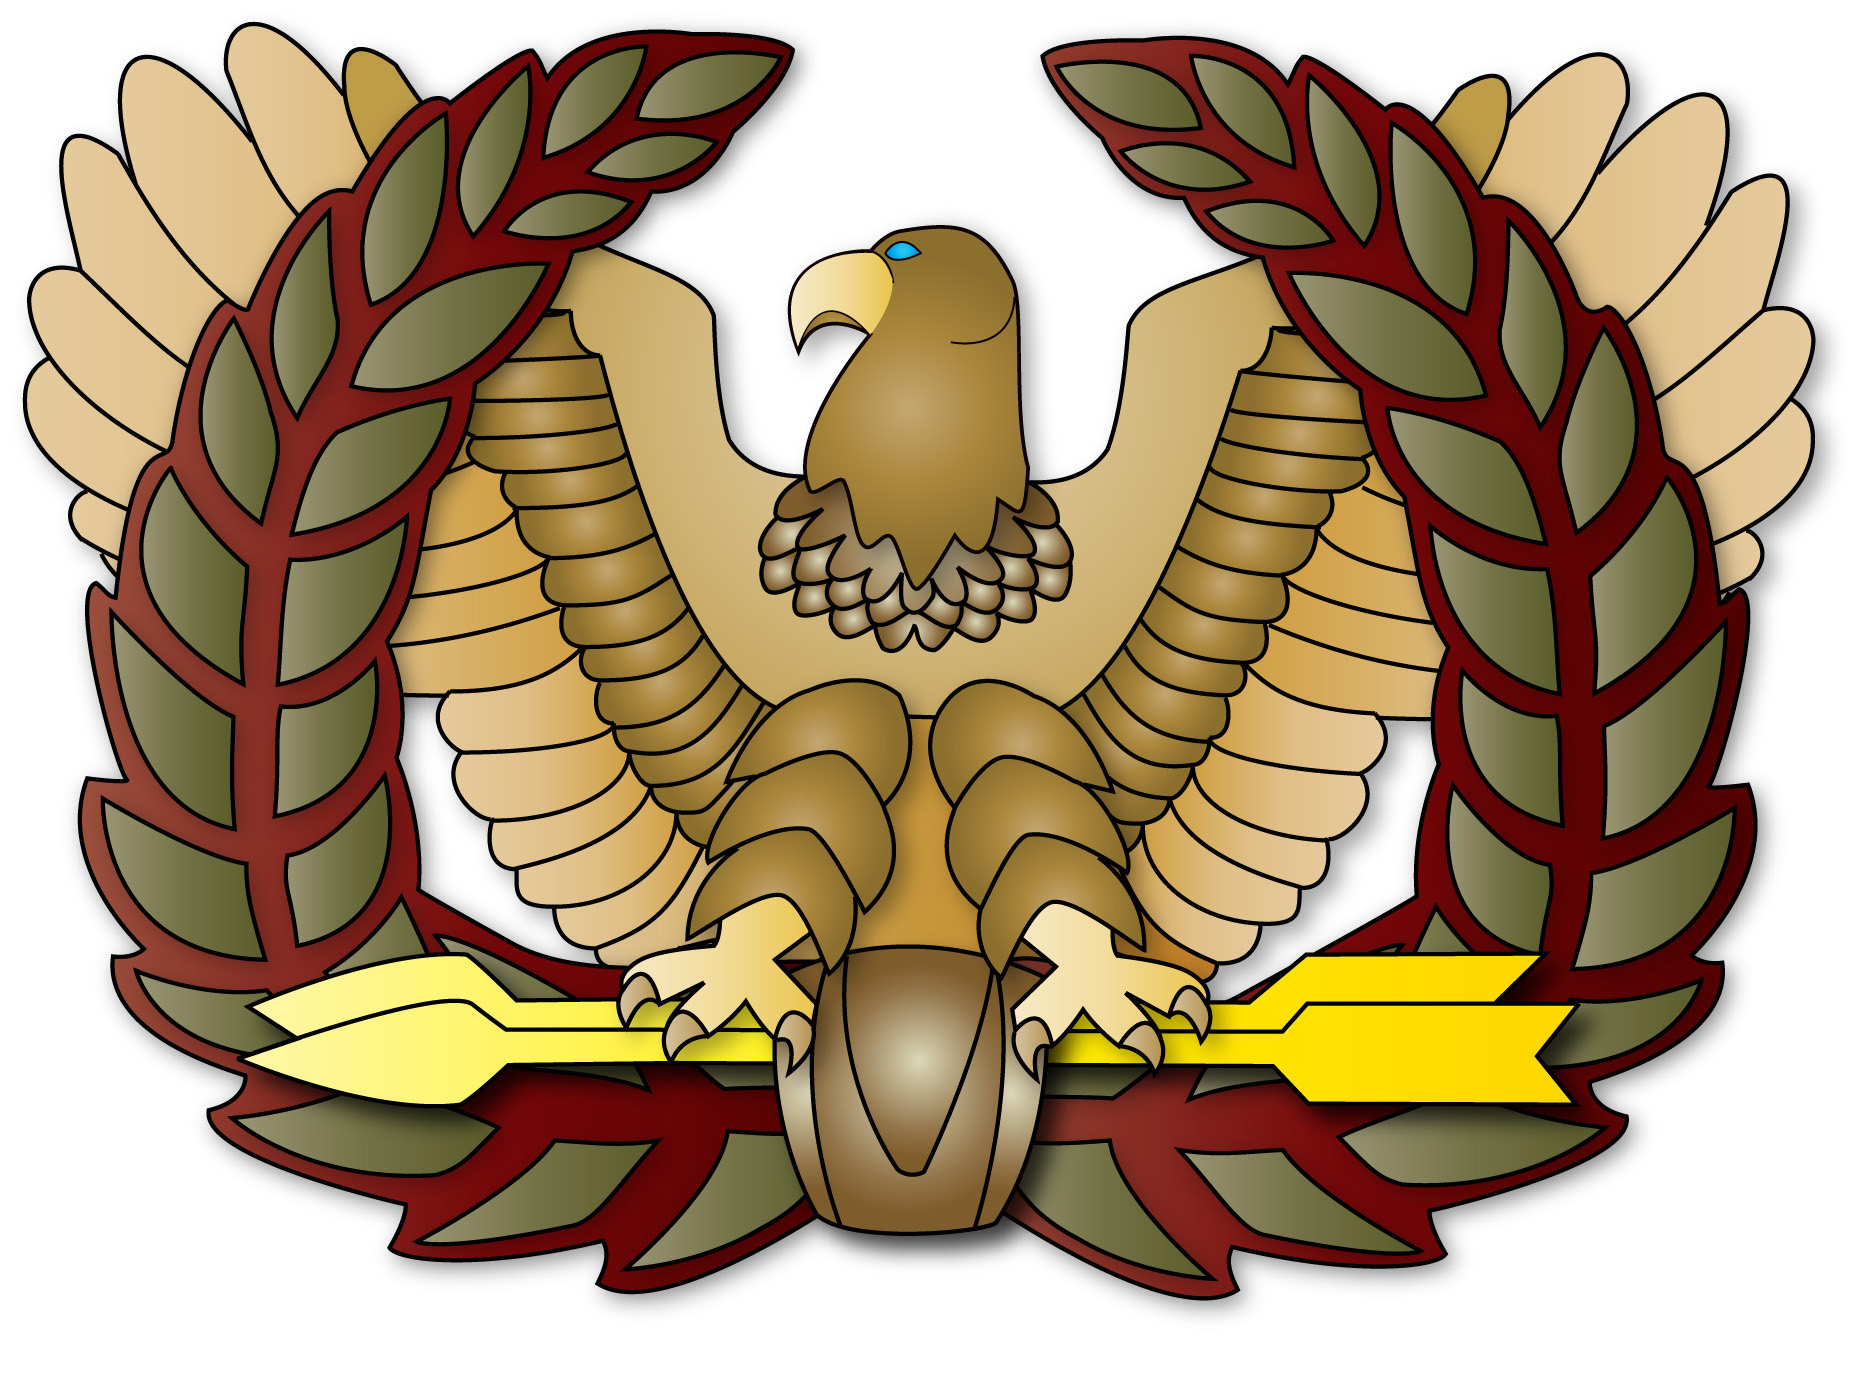 US Army Warrant Officer Insignia drawing free image download